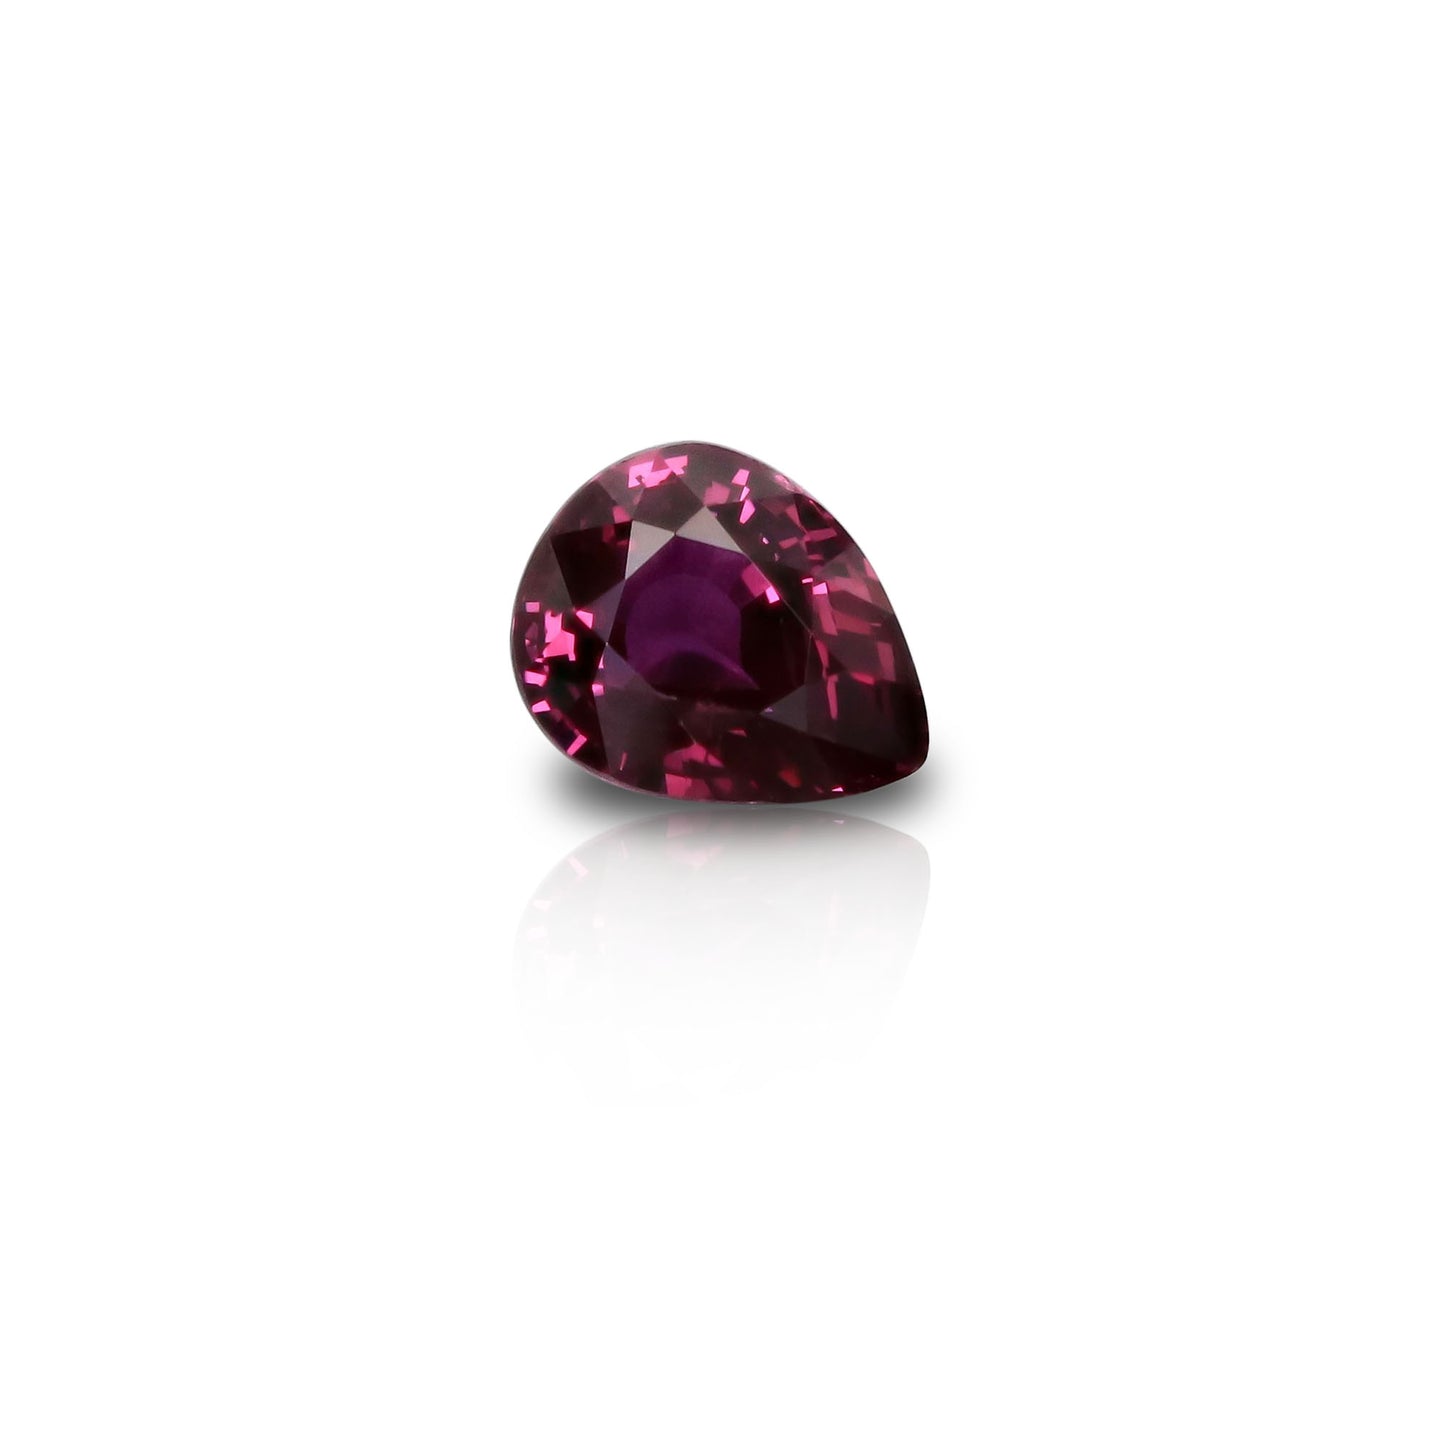 Natural Unheated Ruby Heritage Gems+Jewels – GIA Report Carats 2.27 with